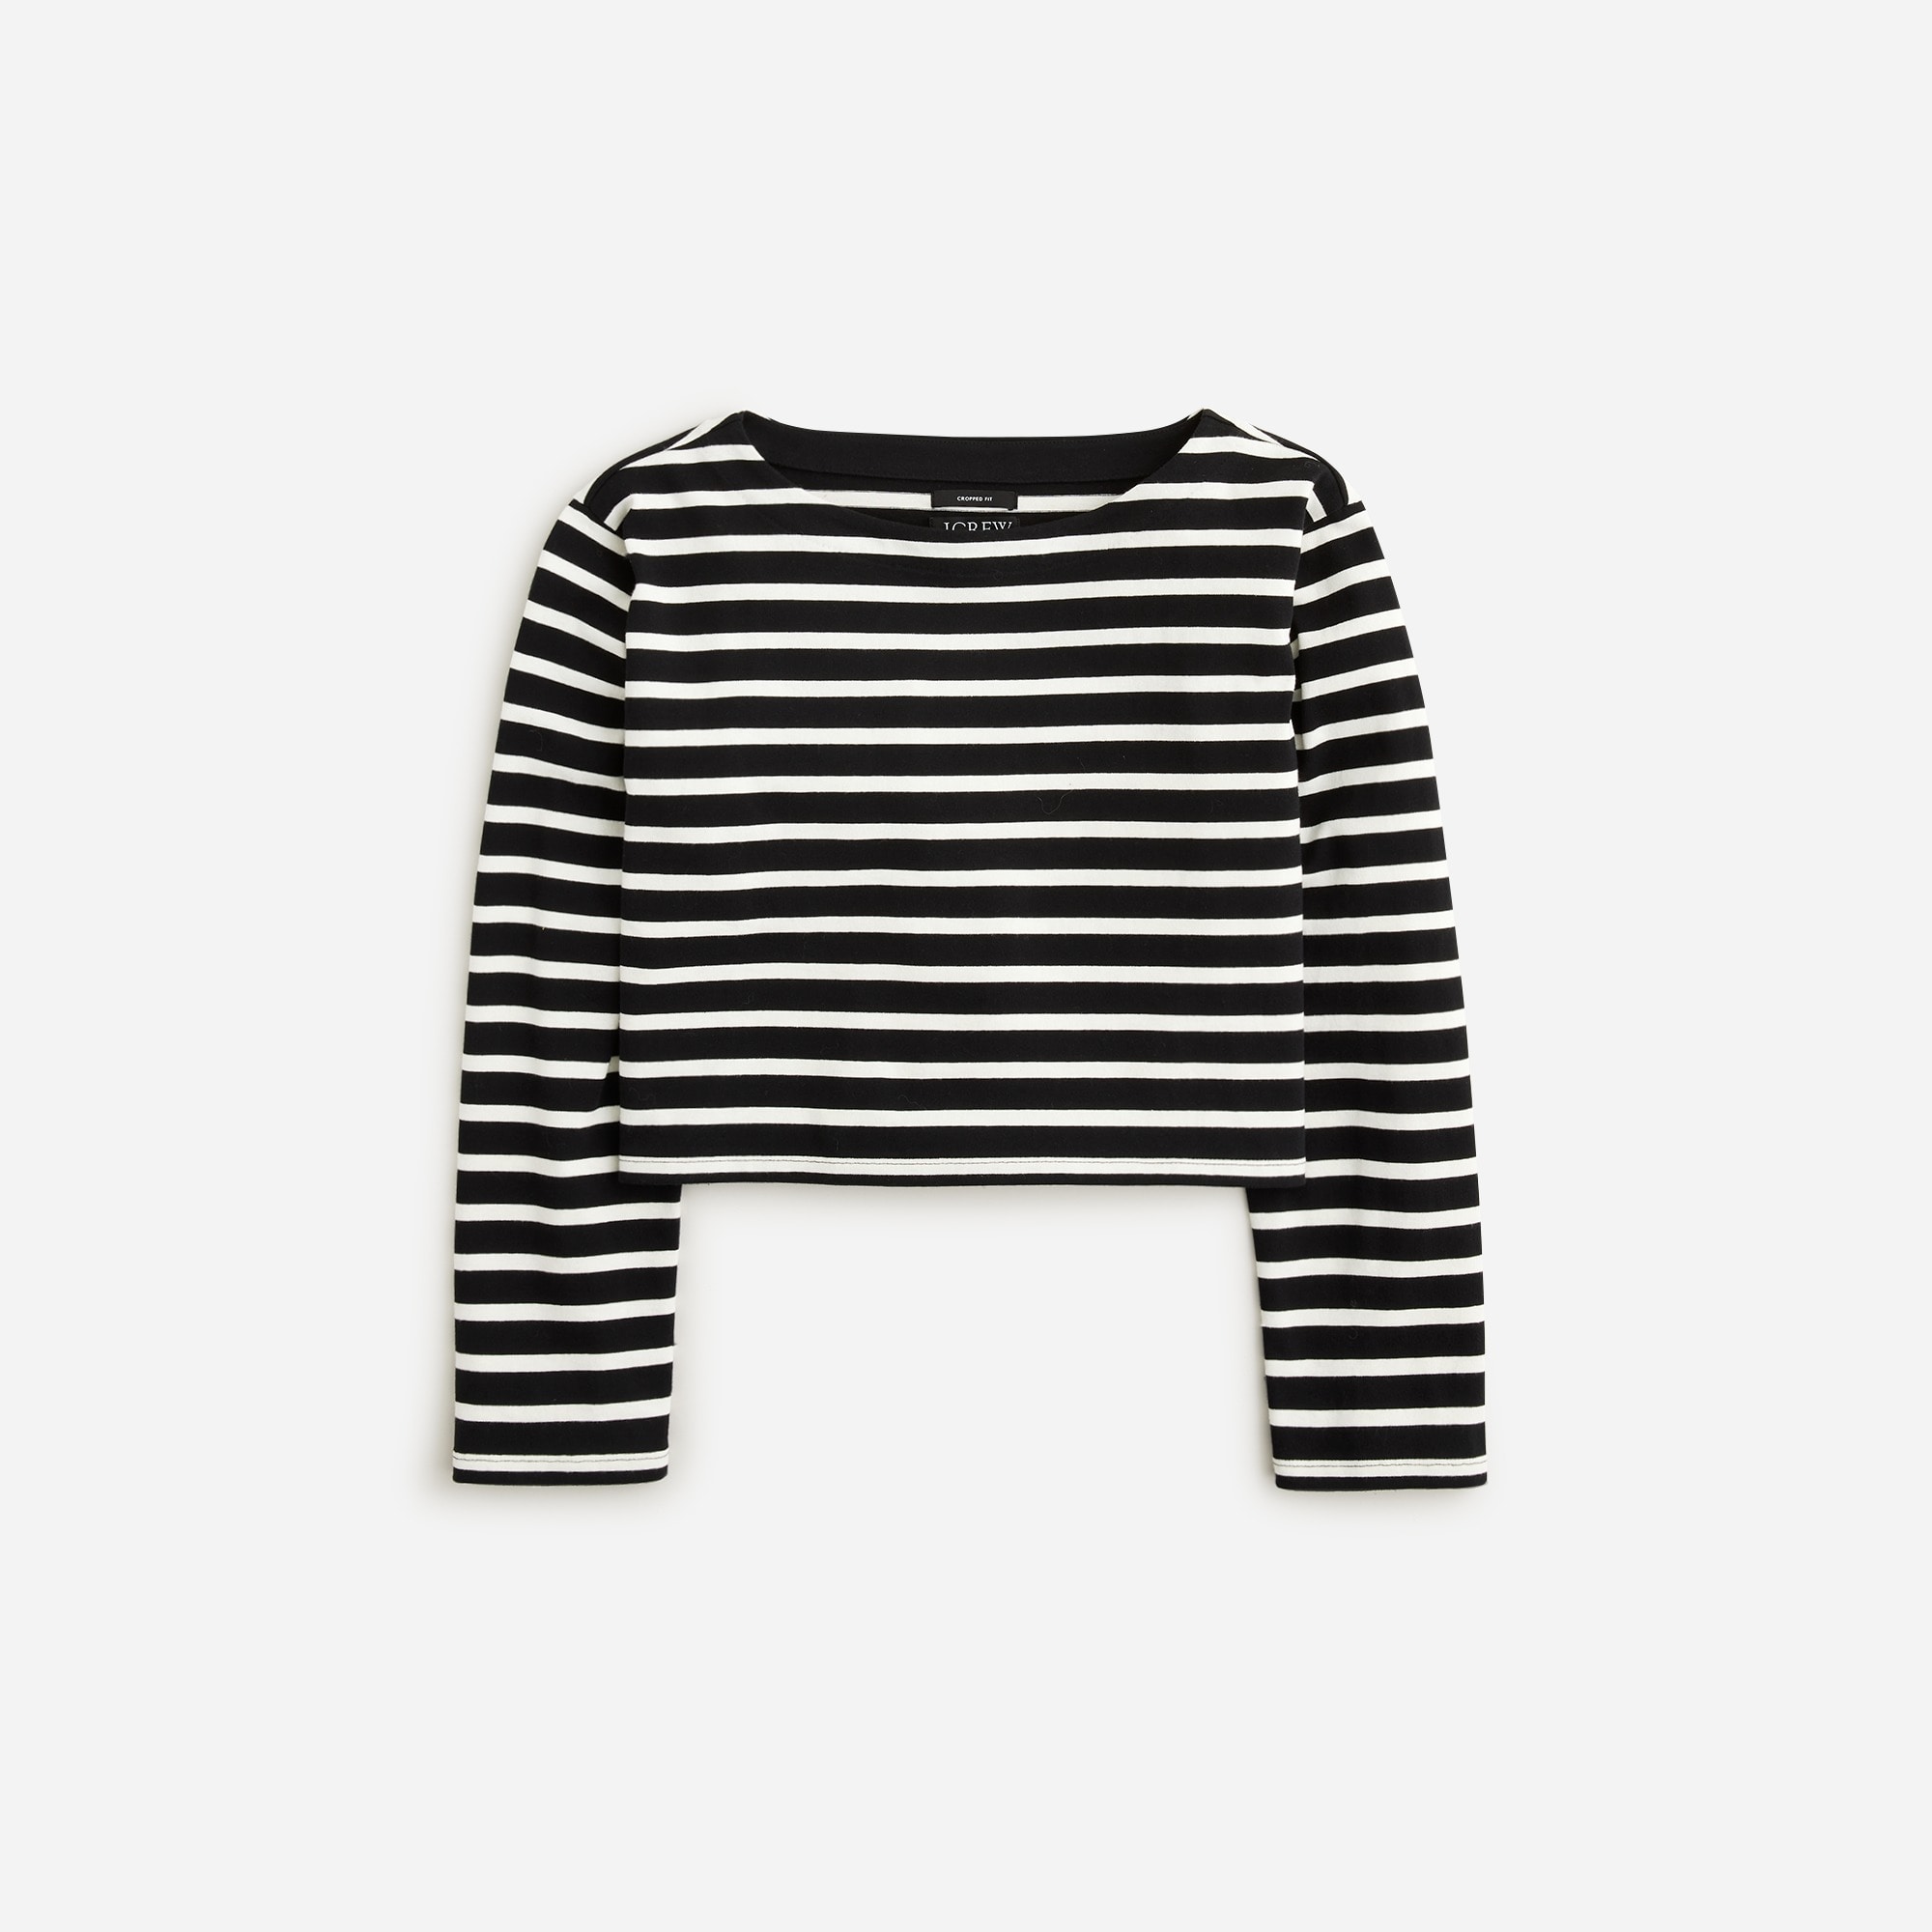  Cropped boatneck T-shirt in mariner cotton